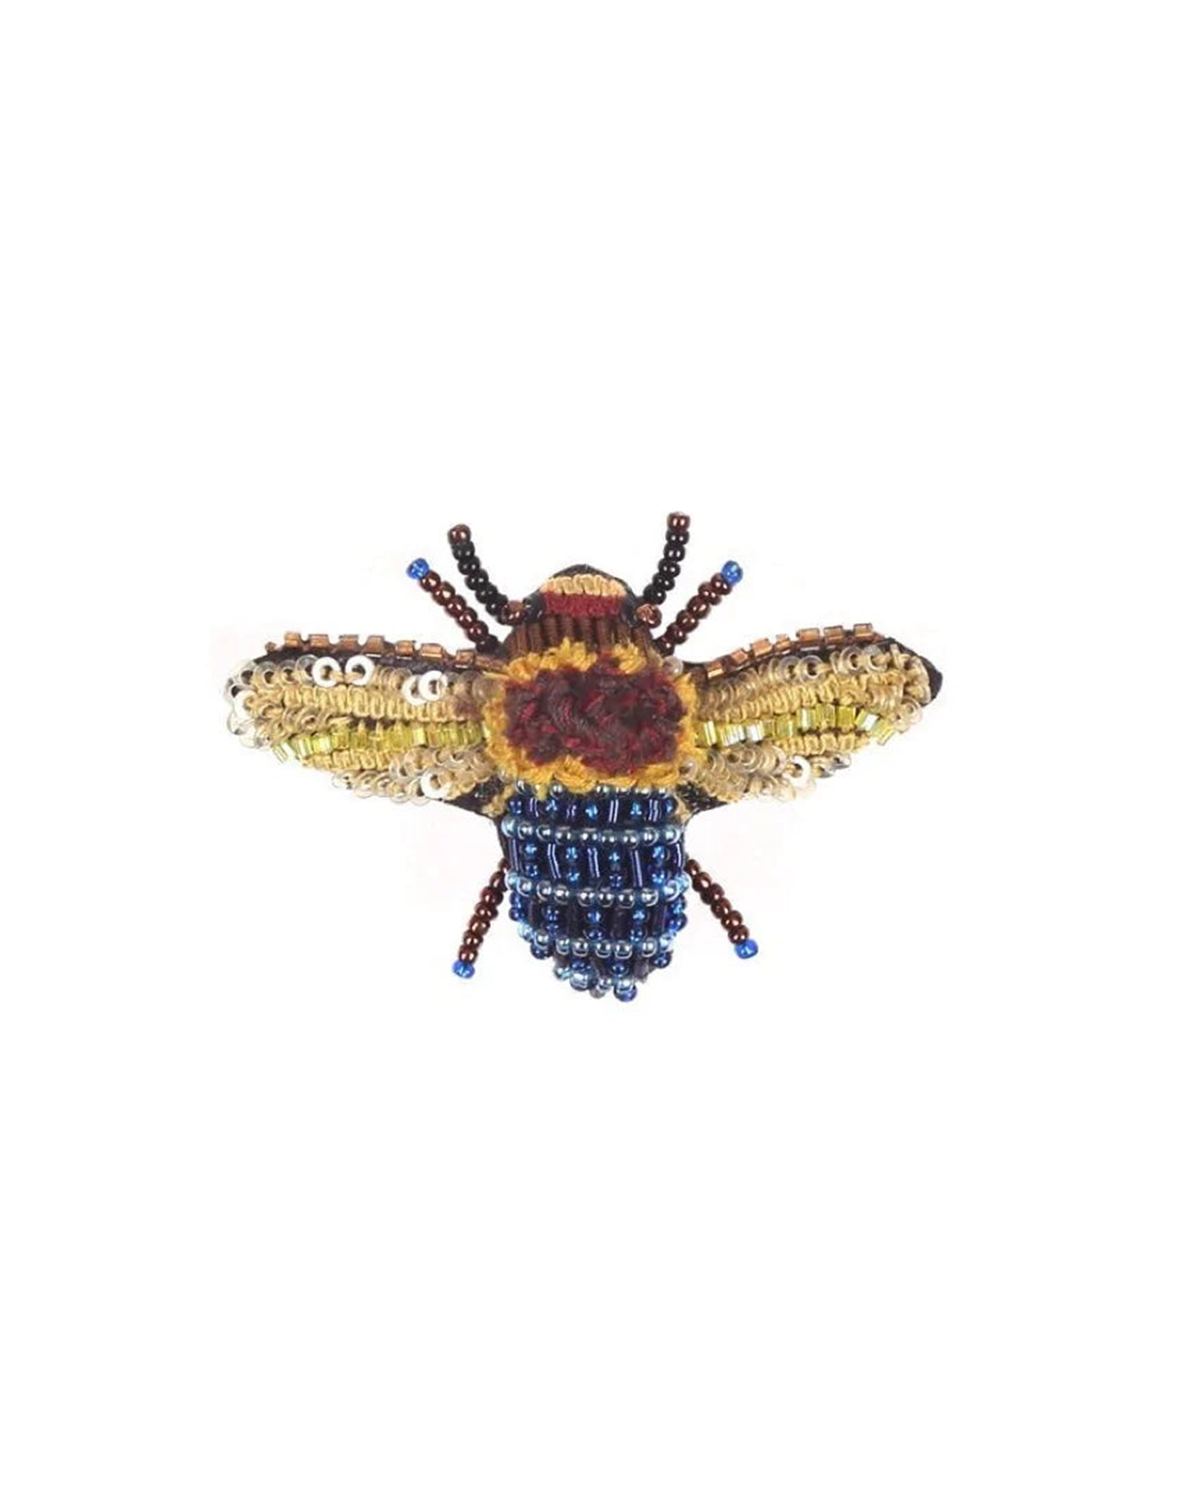 Blue Banded Bee Brooch Pin